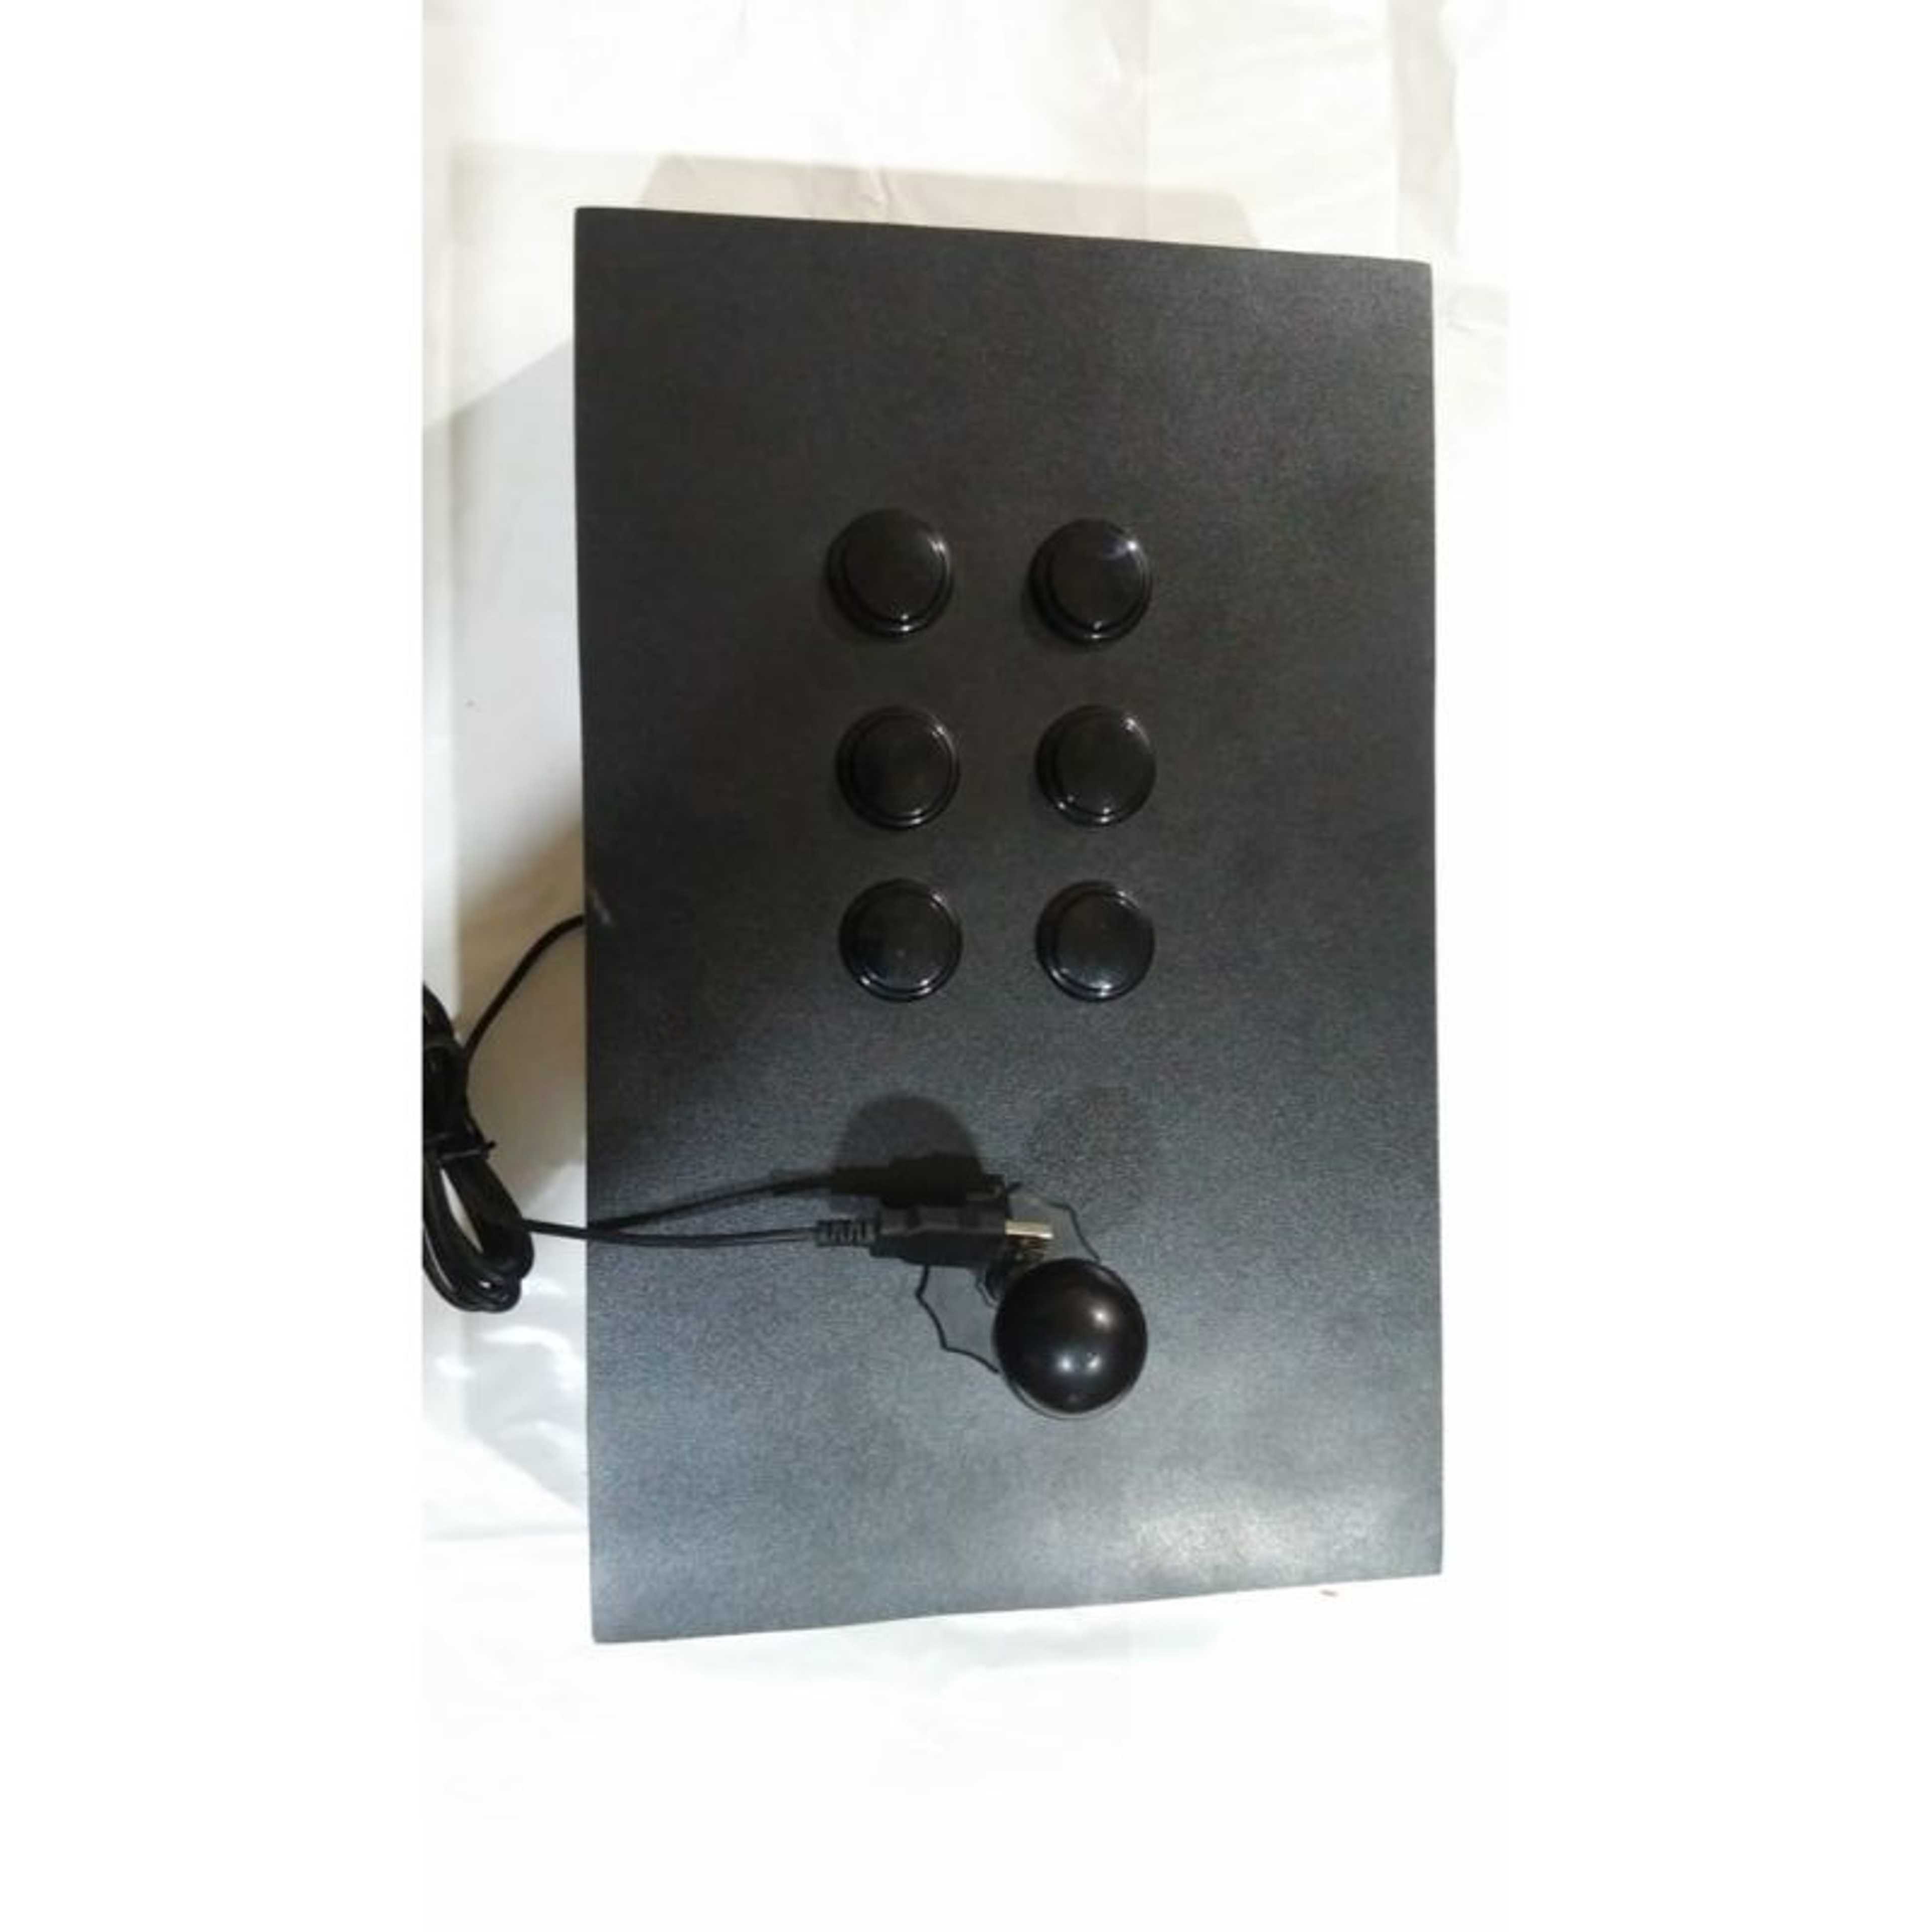 Smooth Usb Game Controller Customized Black Wooden Box Panel Joystick 6 Buttons Game Arcade